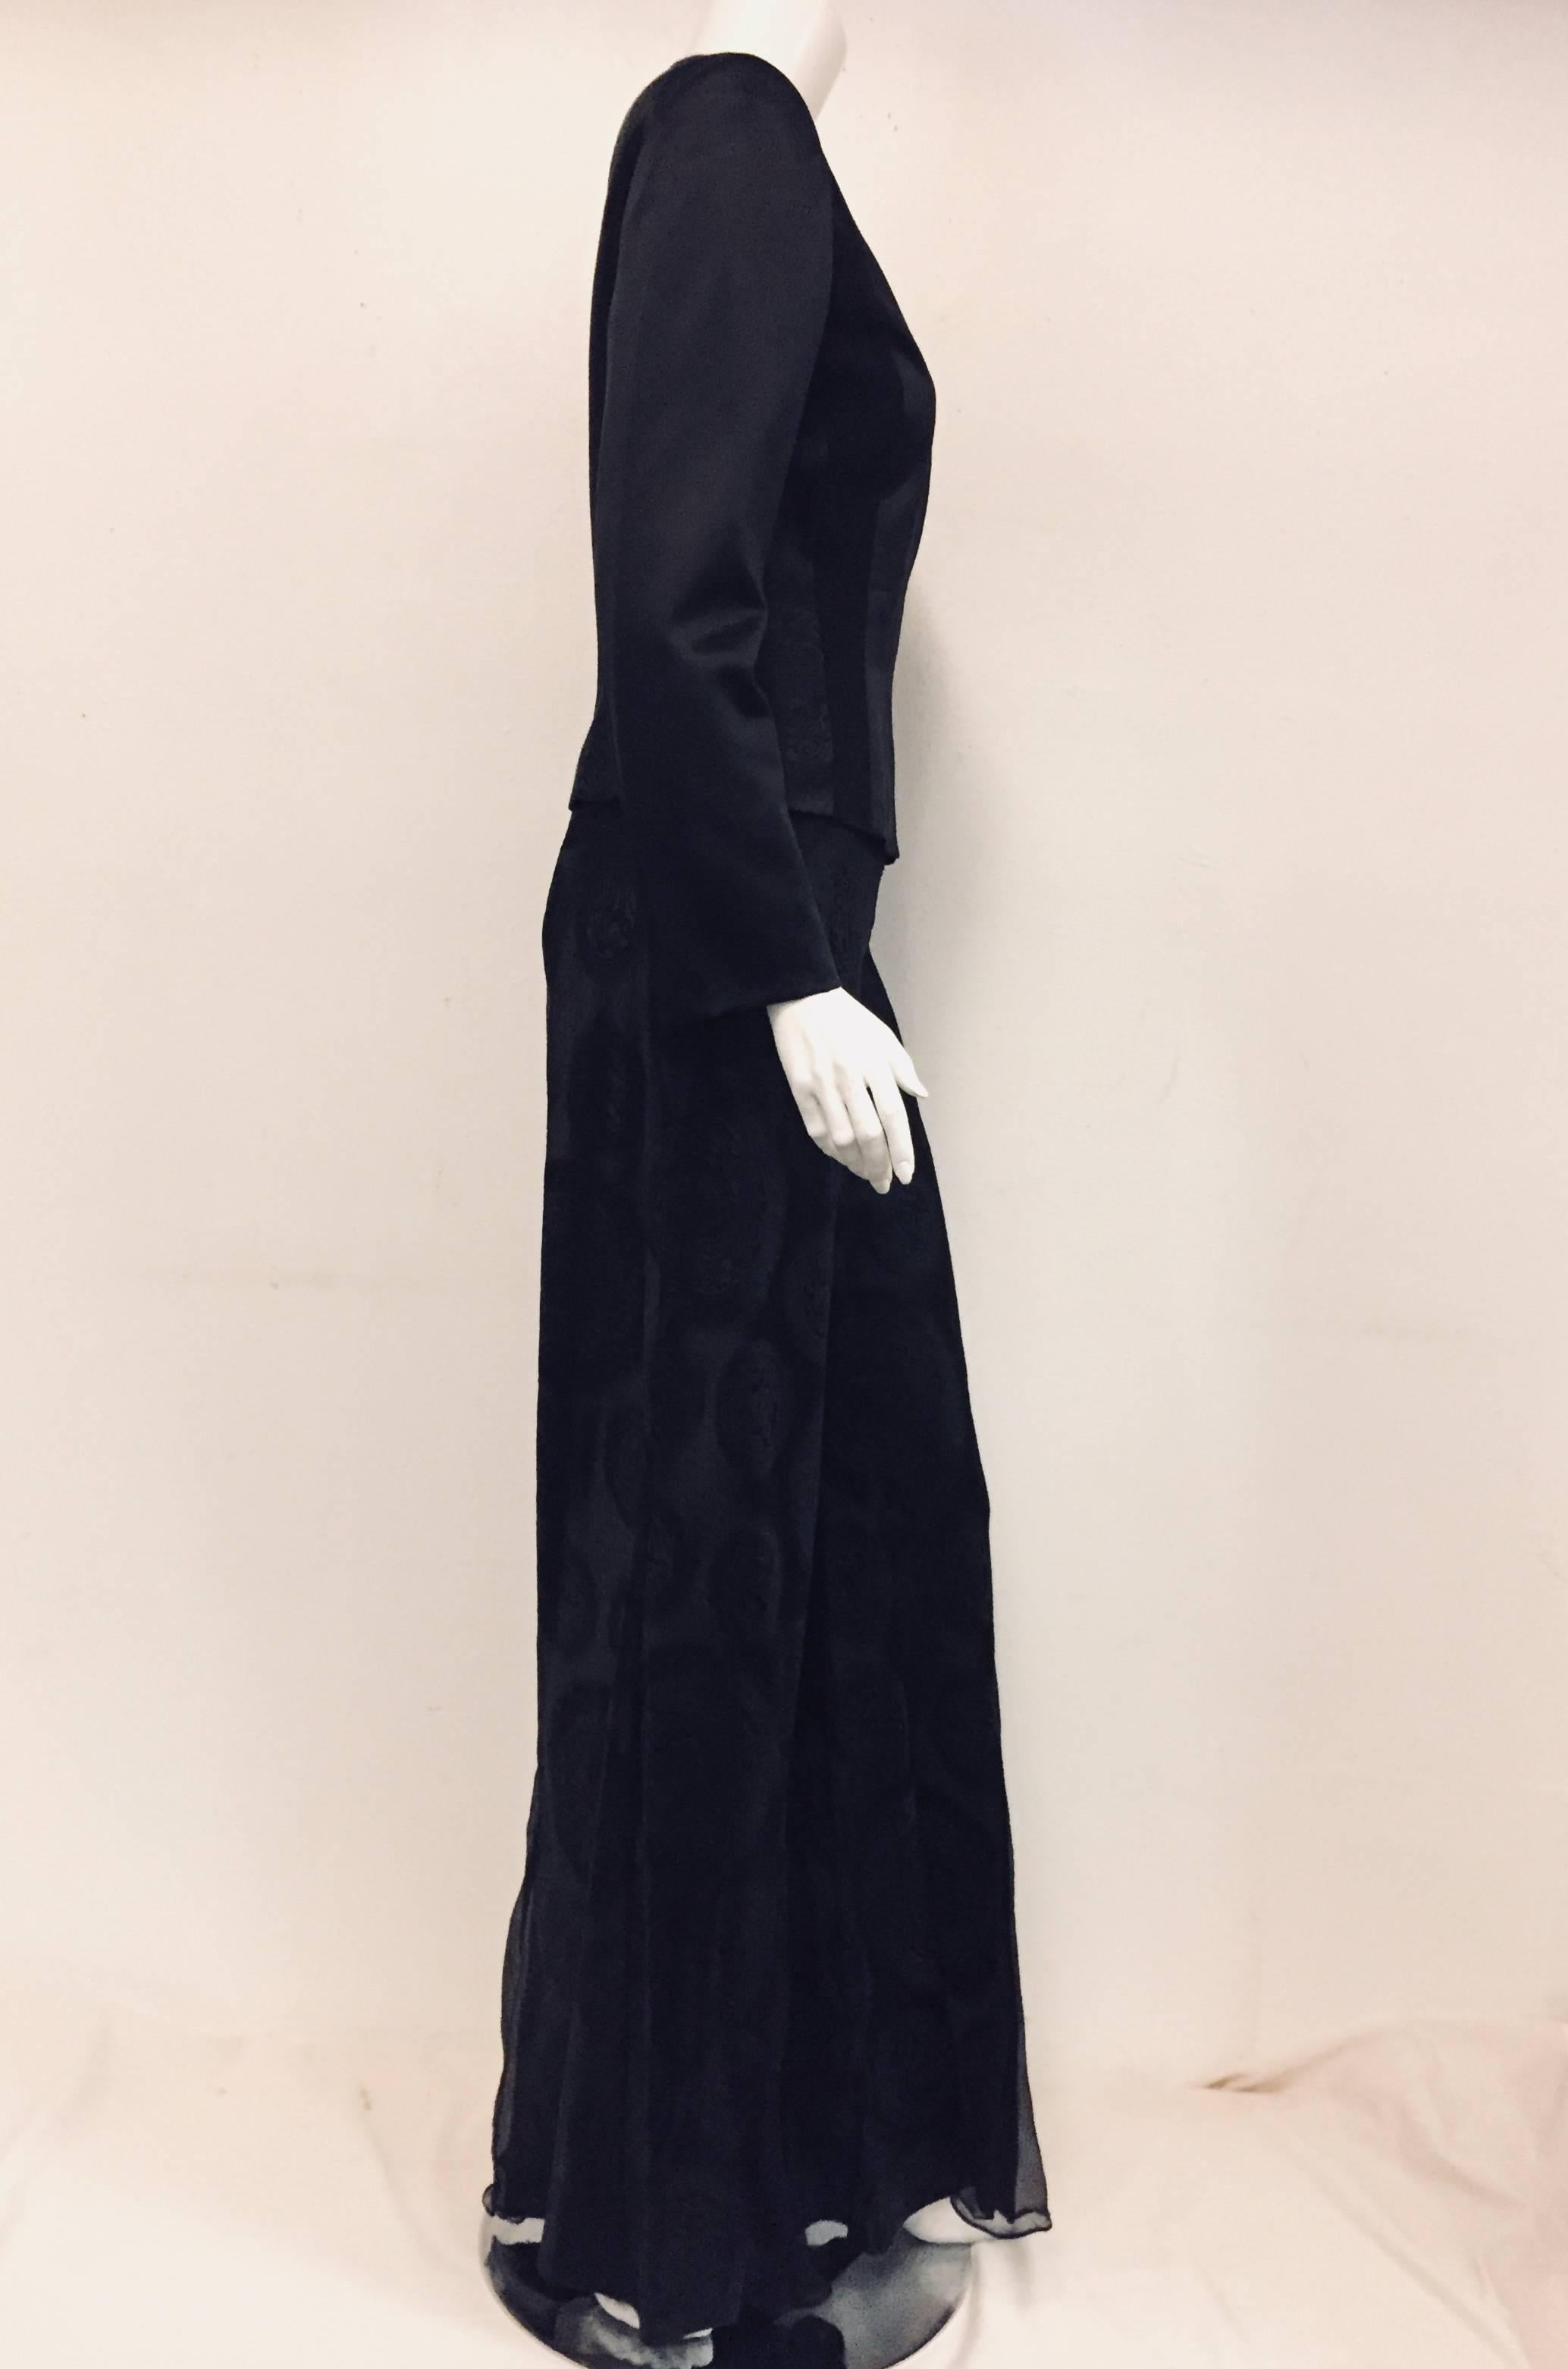 This John Galliano black wool and silk pant suit with oriental medallions allover the  palazzo pants is as inspiring today as when it was designed.   A round neckline, front zipper closure and different cut fabric strips fashioning a vertical